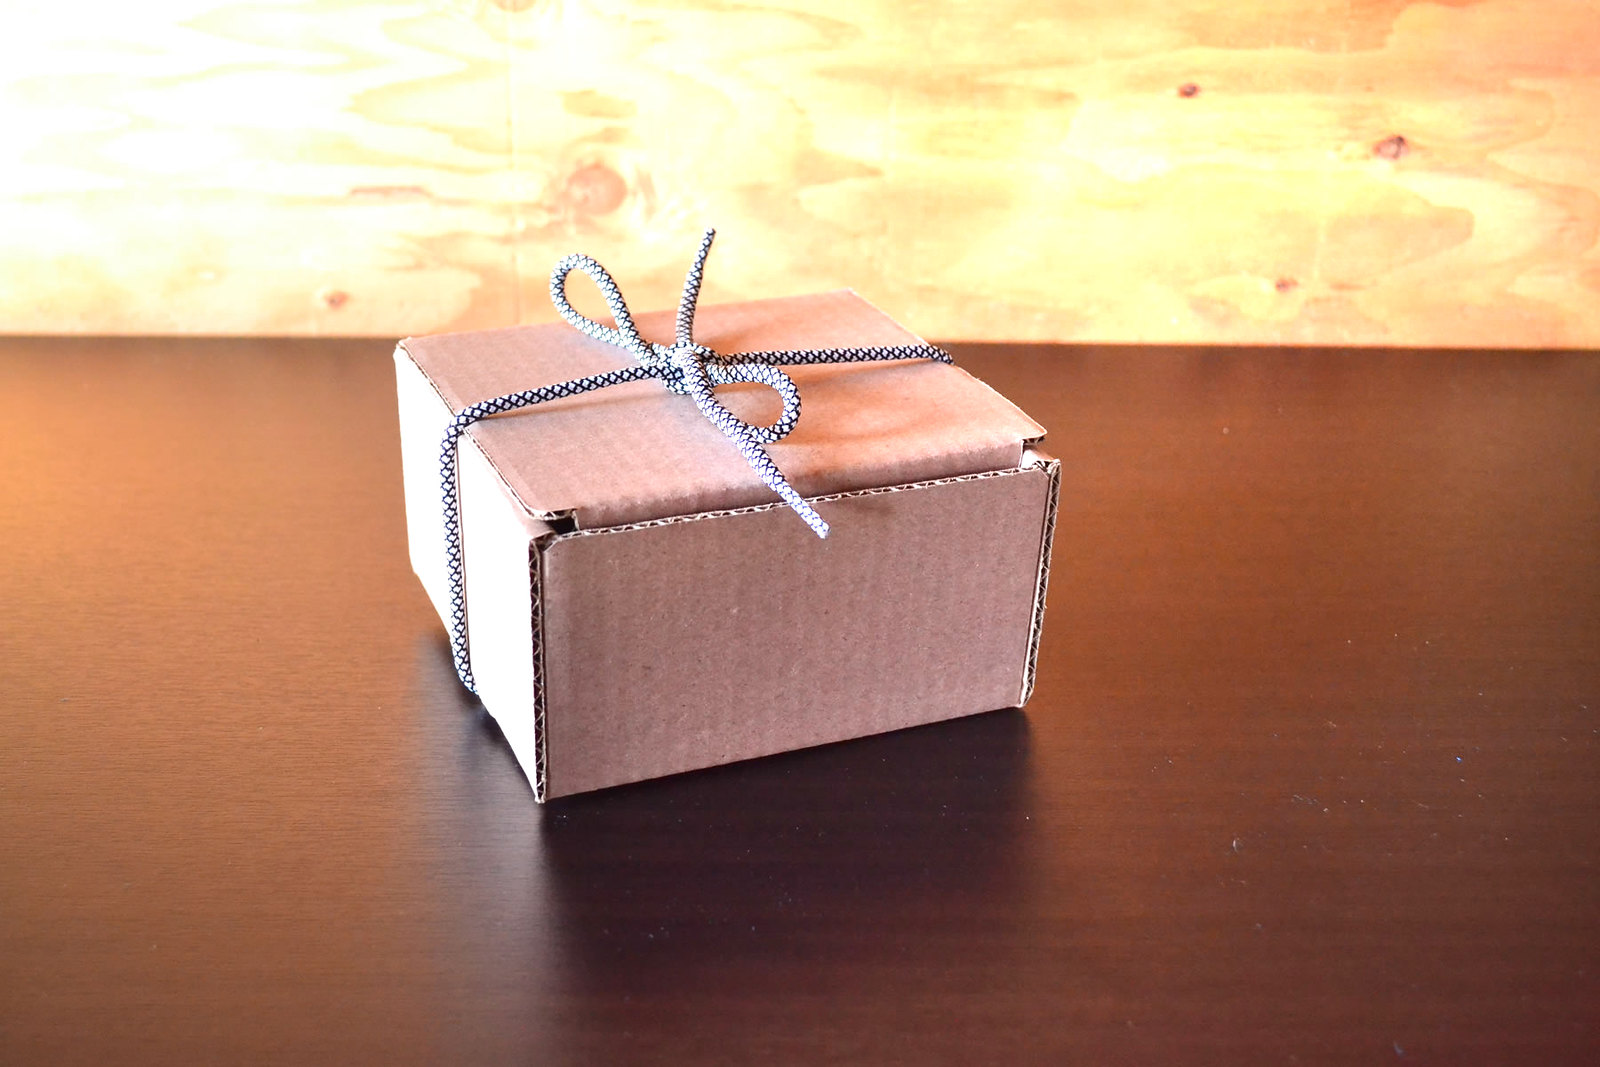 Winter 2021 - Sarah's Recycled Gift Box